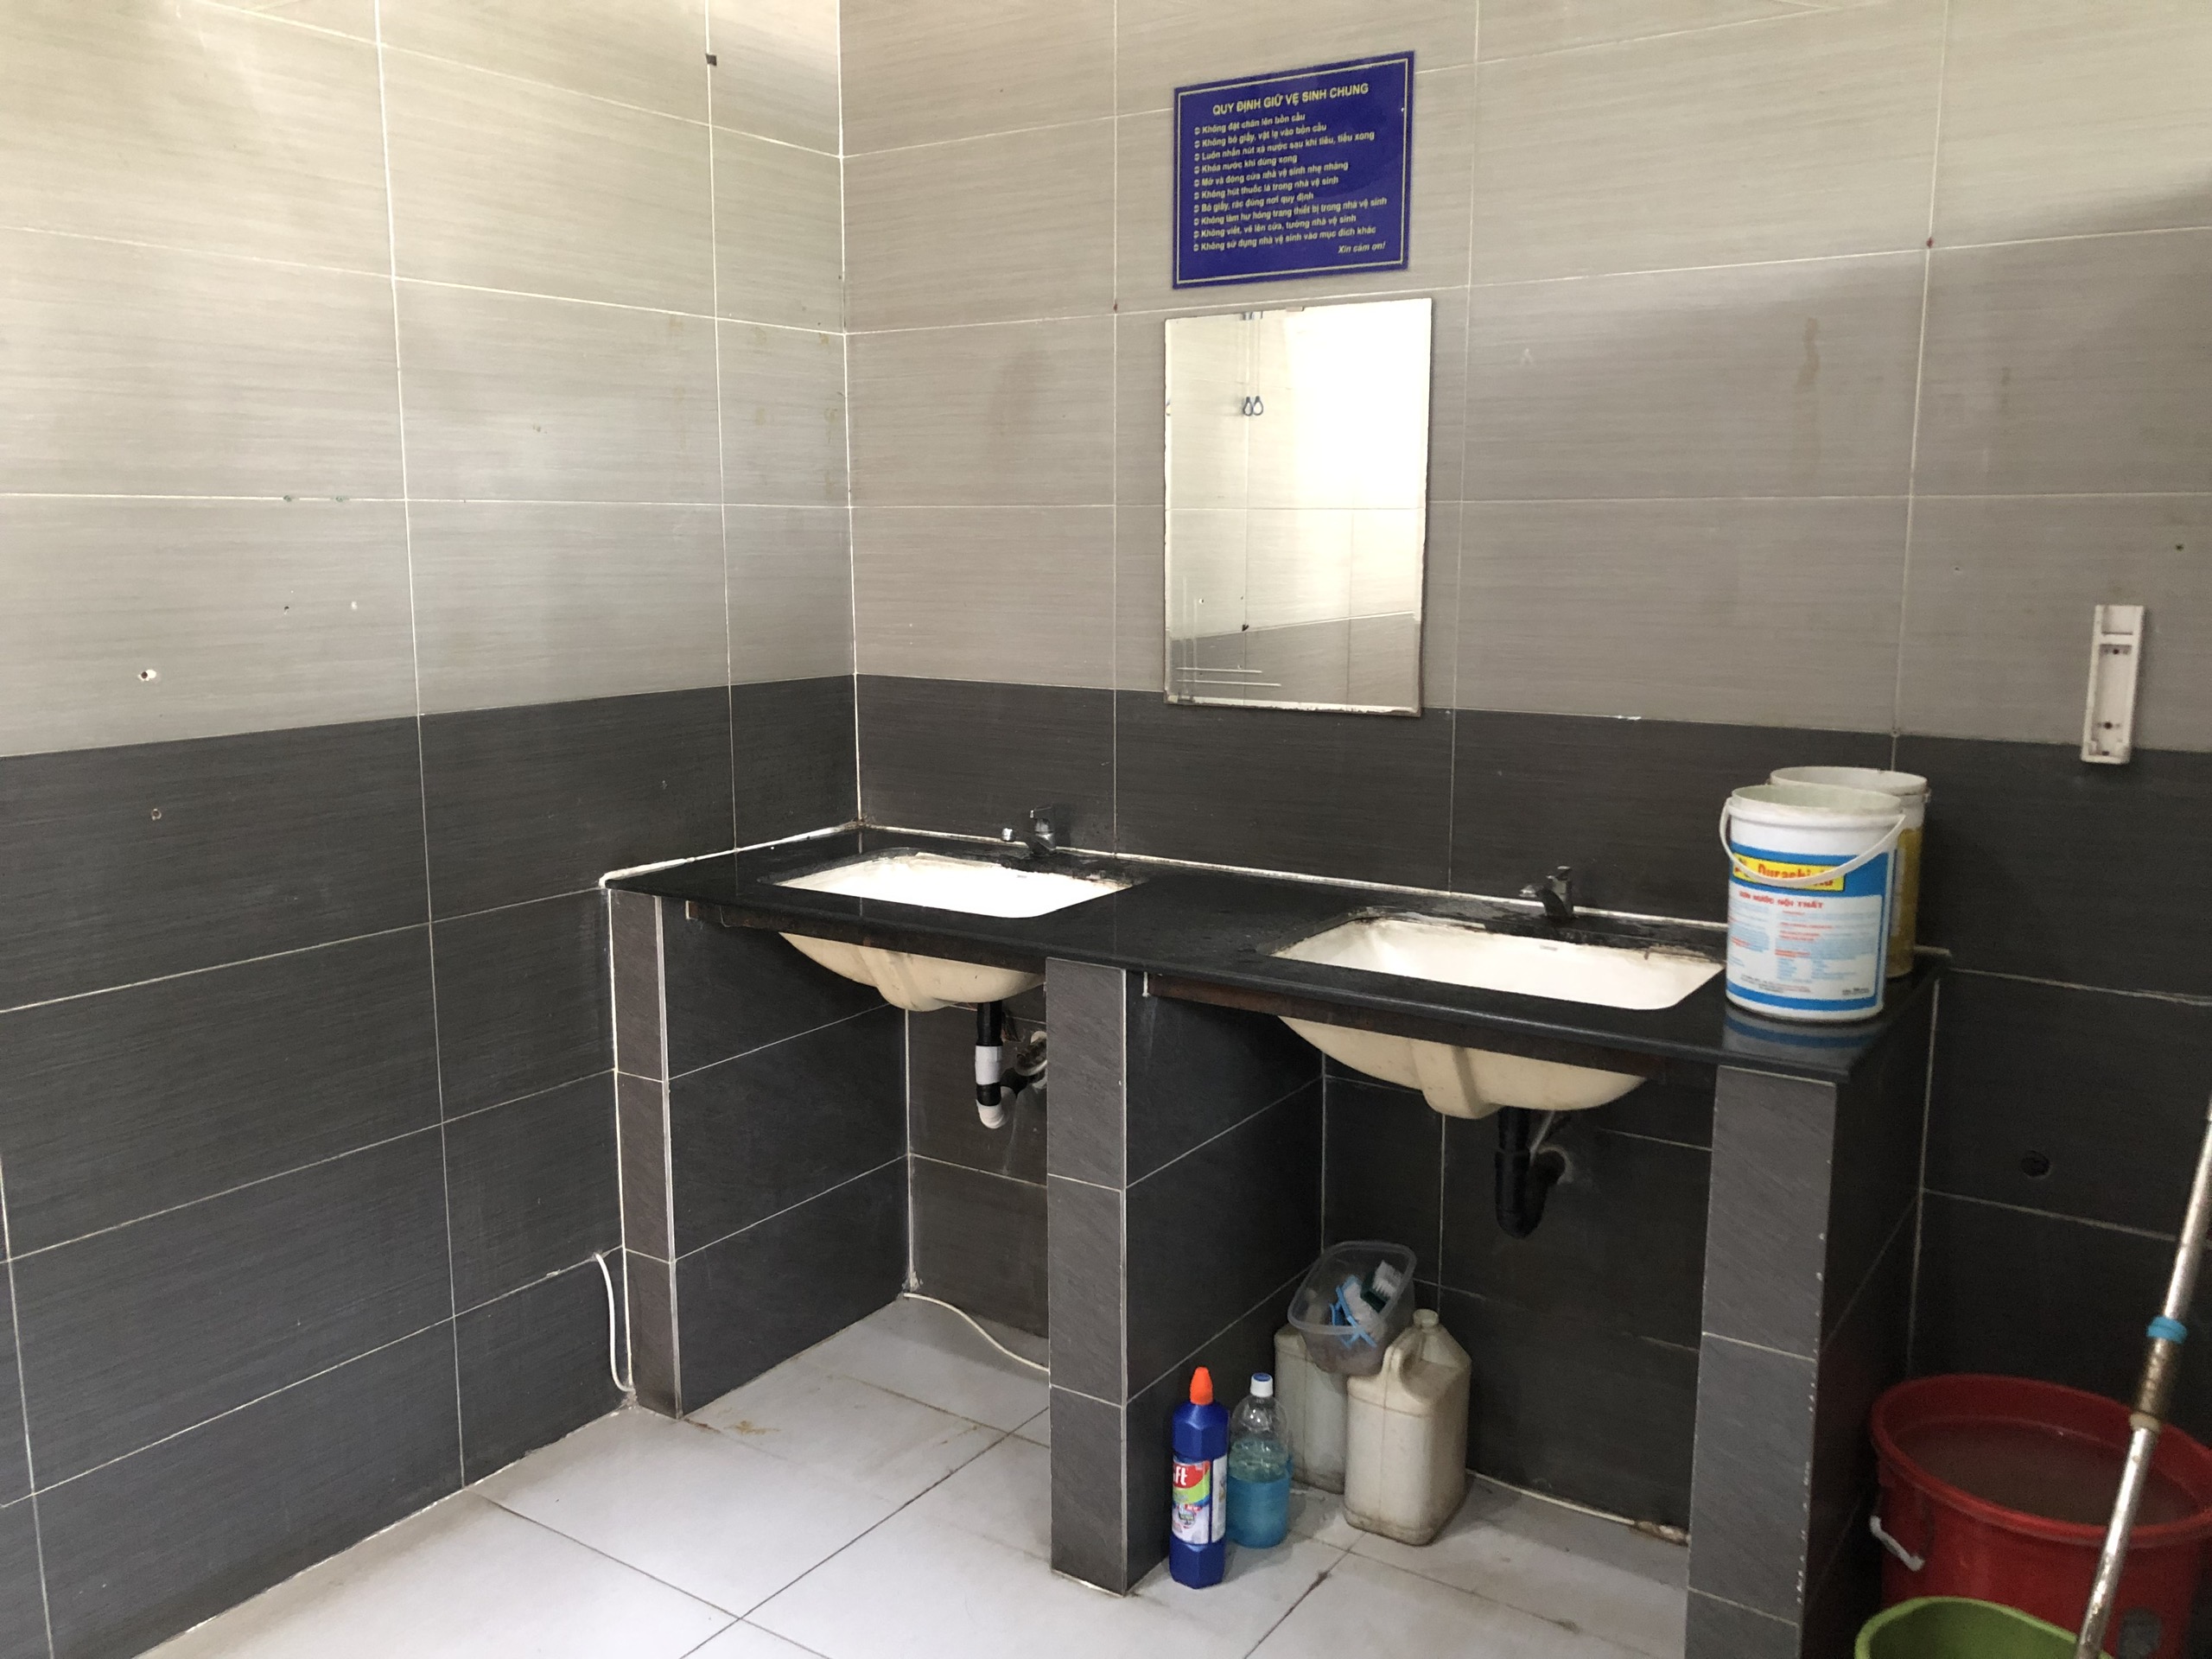 Buckets of water are placed on a hand washing station so that visitors can flush toilets inside the women’s restroom at the Saigon Railway Station in Ho Chi Minh City. Photo: Luu Duyen / Tuoi Tre